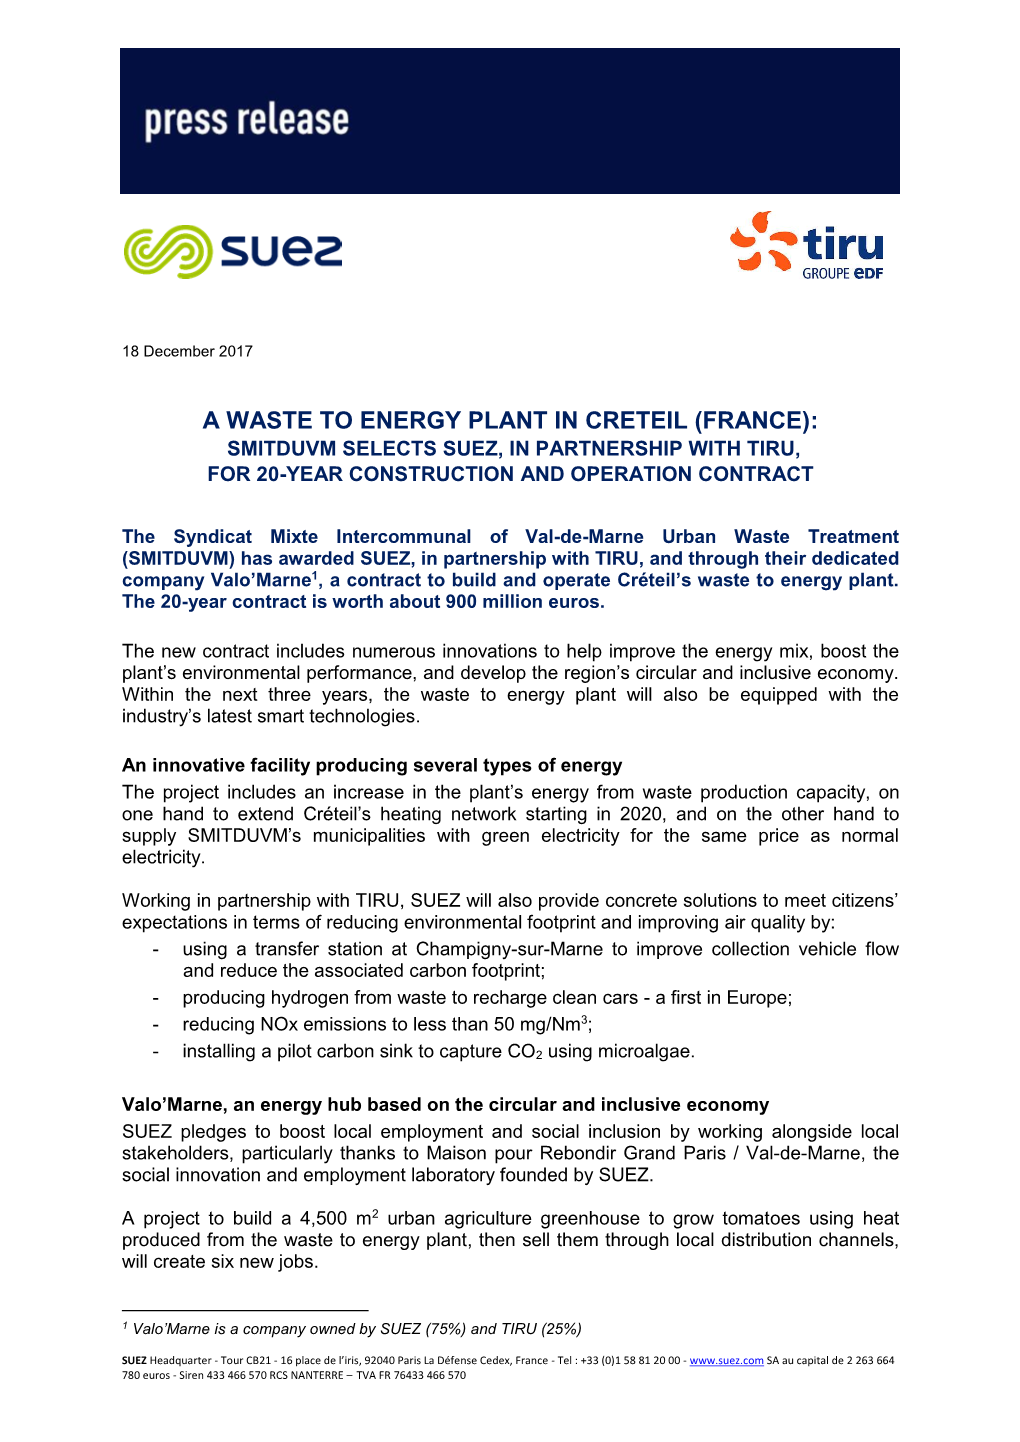 A Waste to Energy Plant in Creteil (France): Smitduvm Selects Suez, in Partnership with Tiru, for 20-Year Construction and Operation Contract